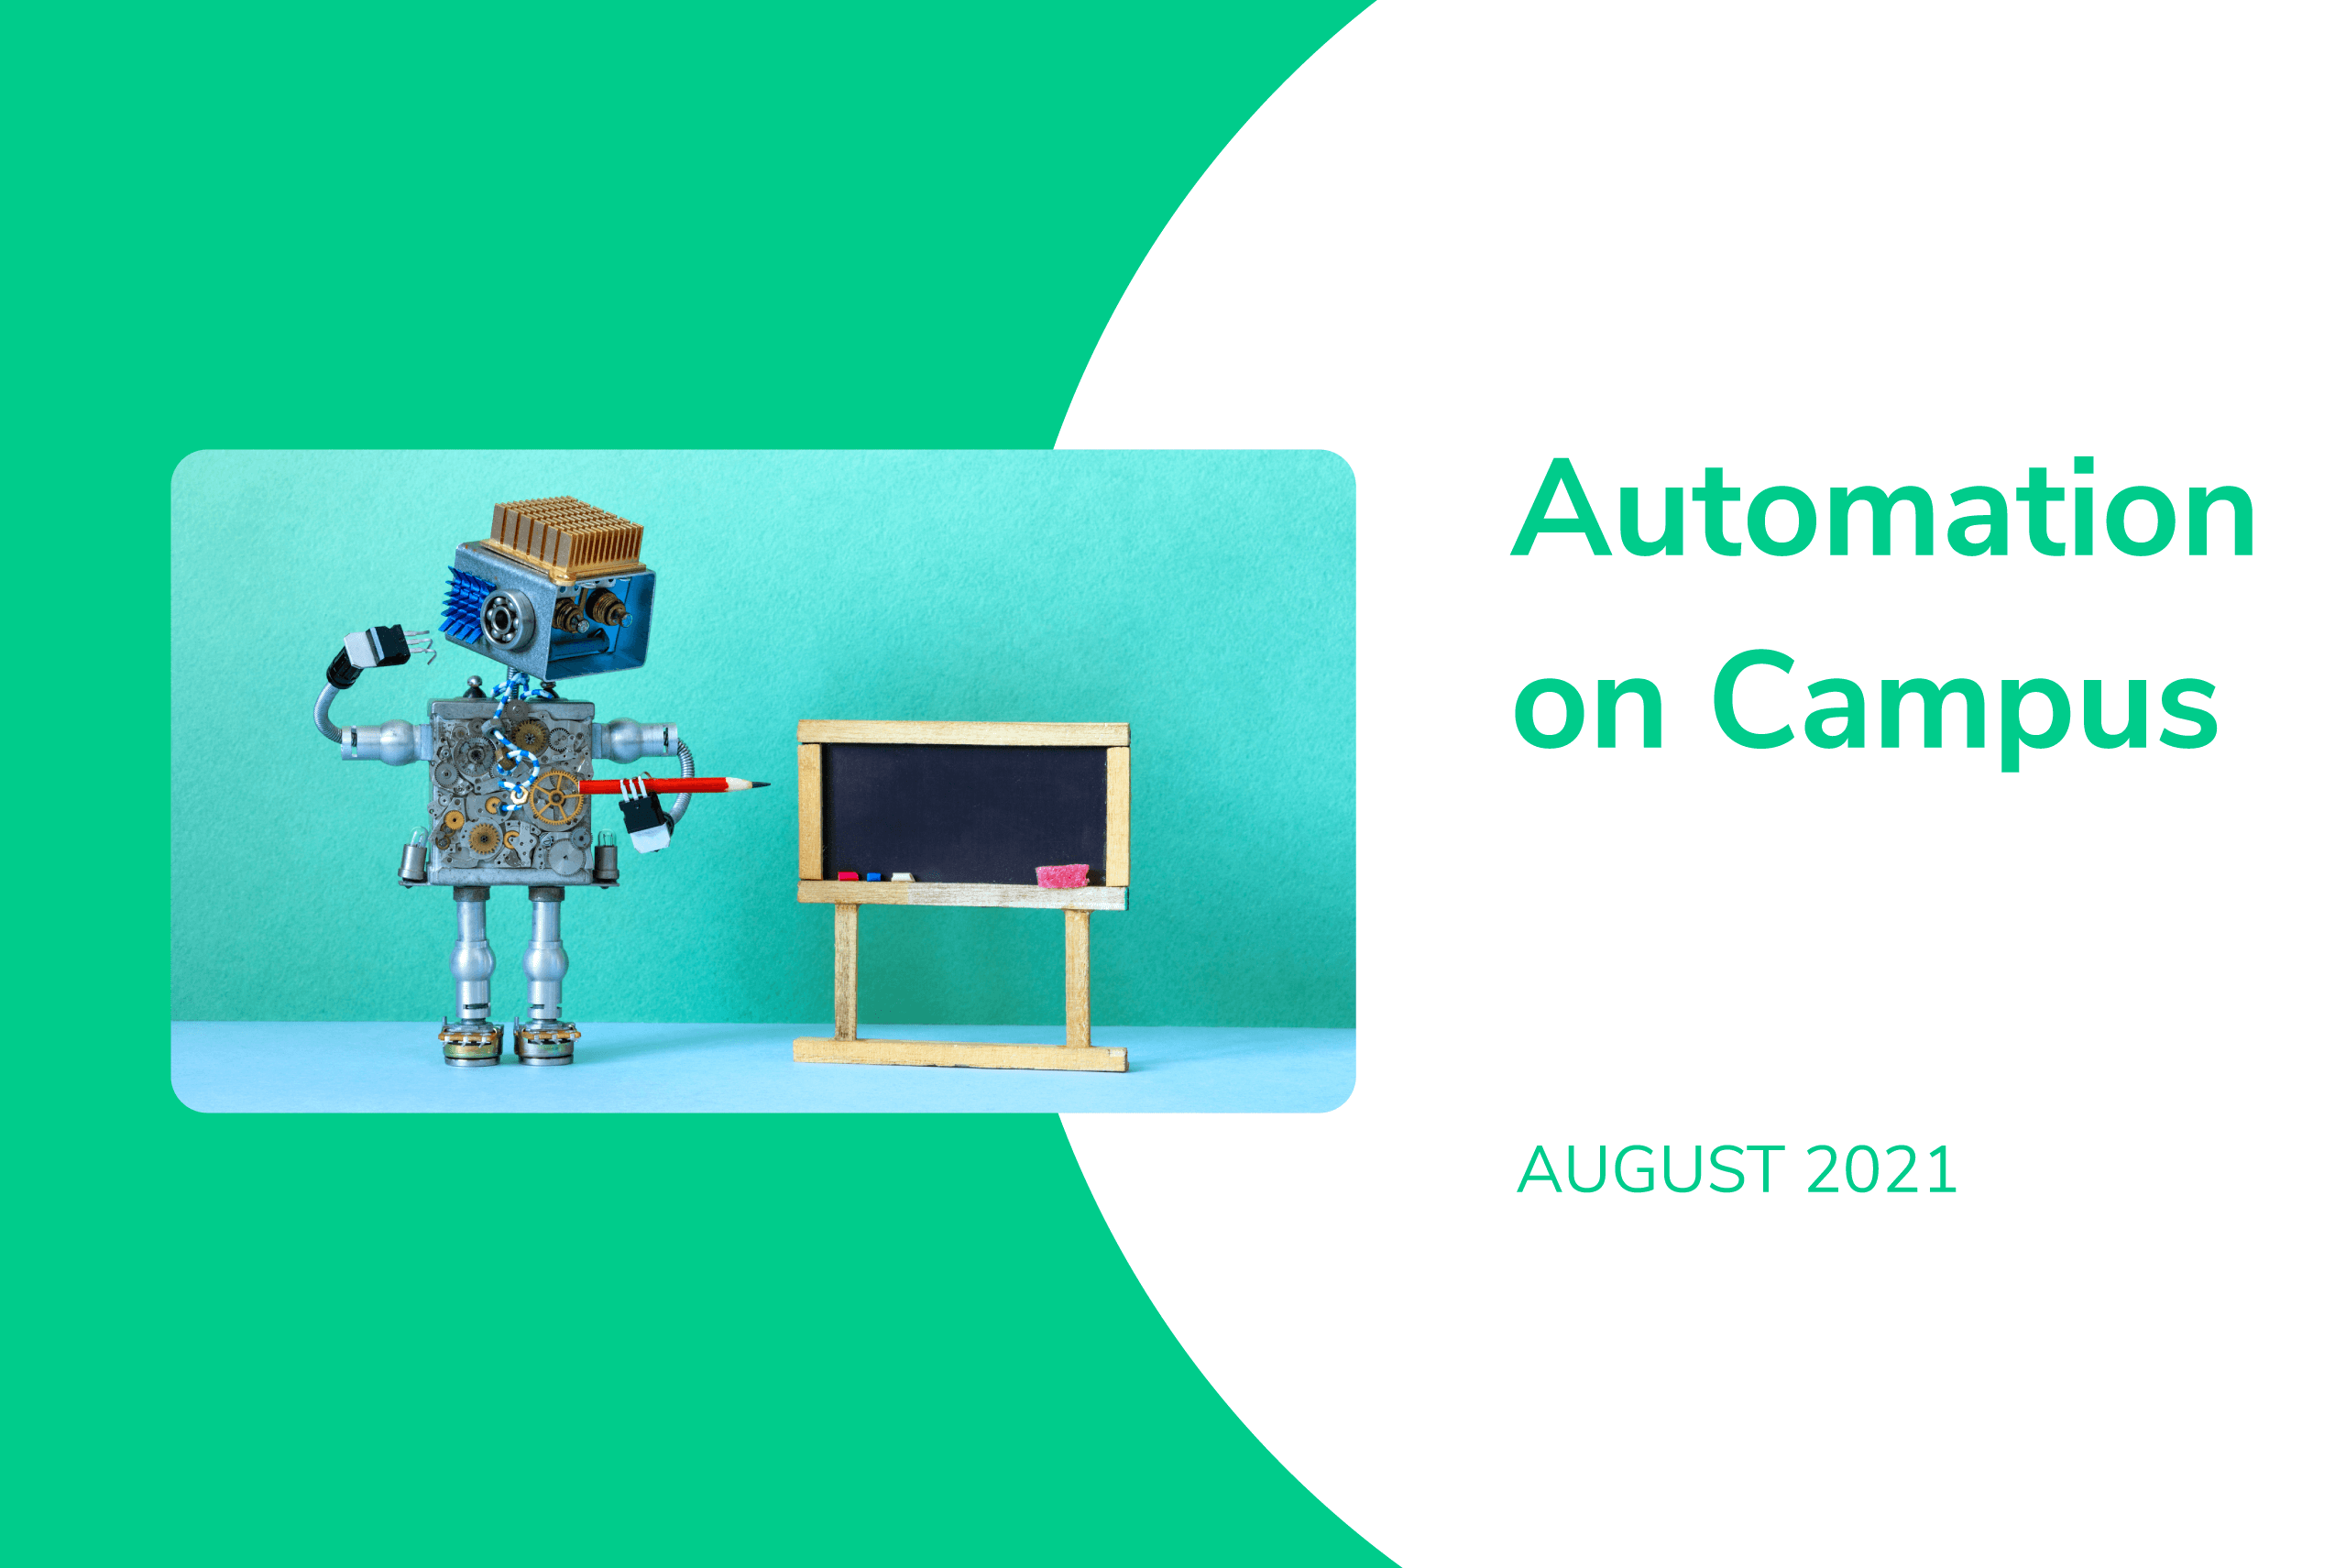 The automated smart campus